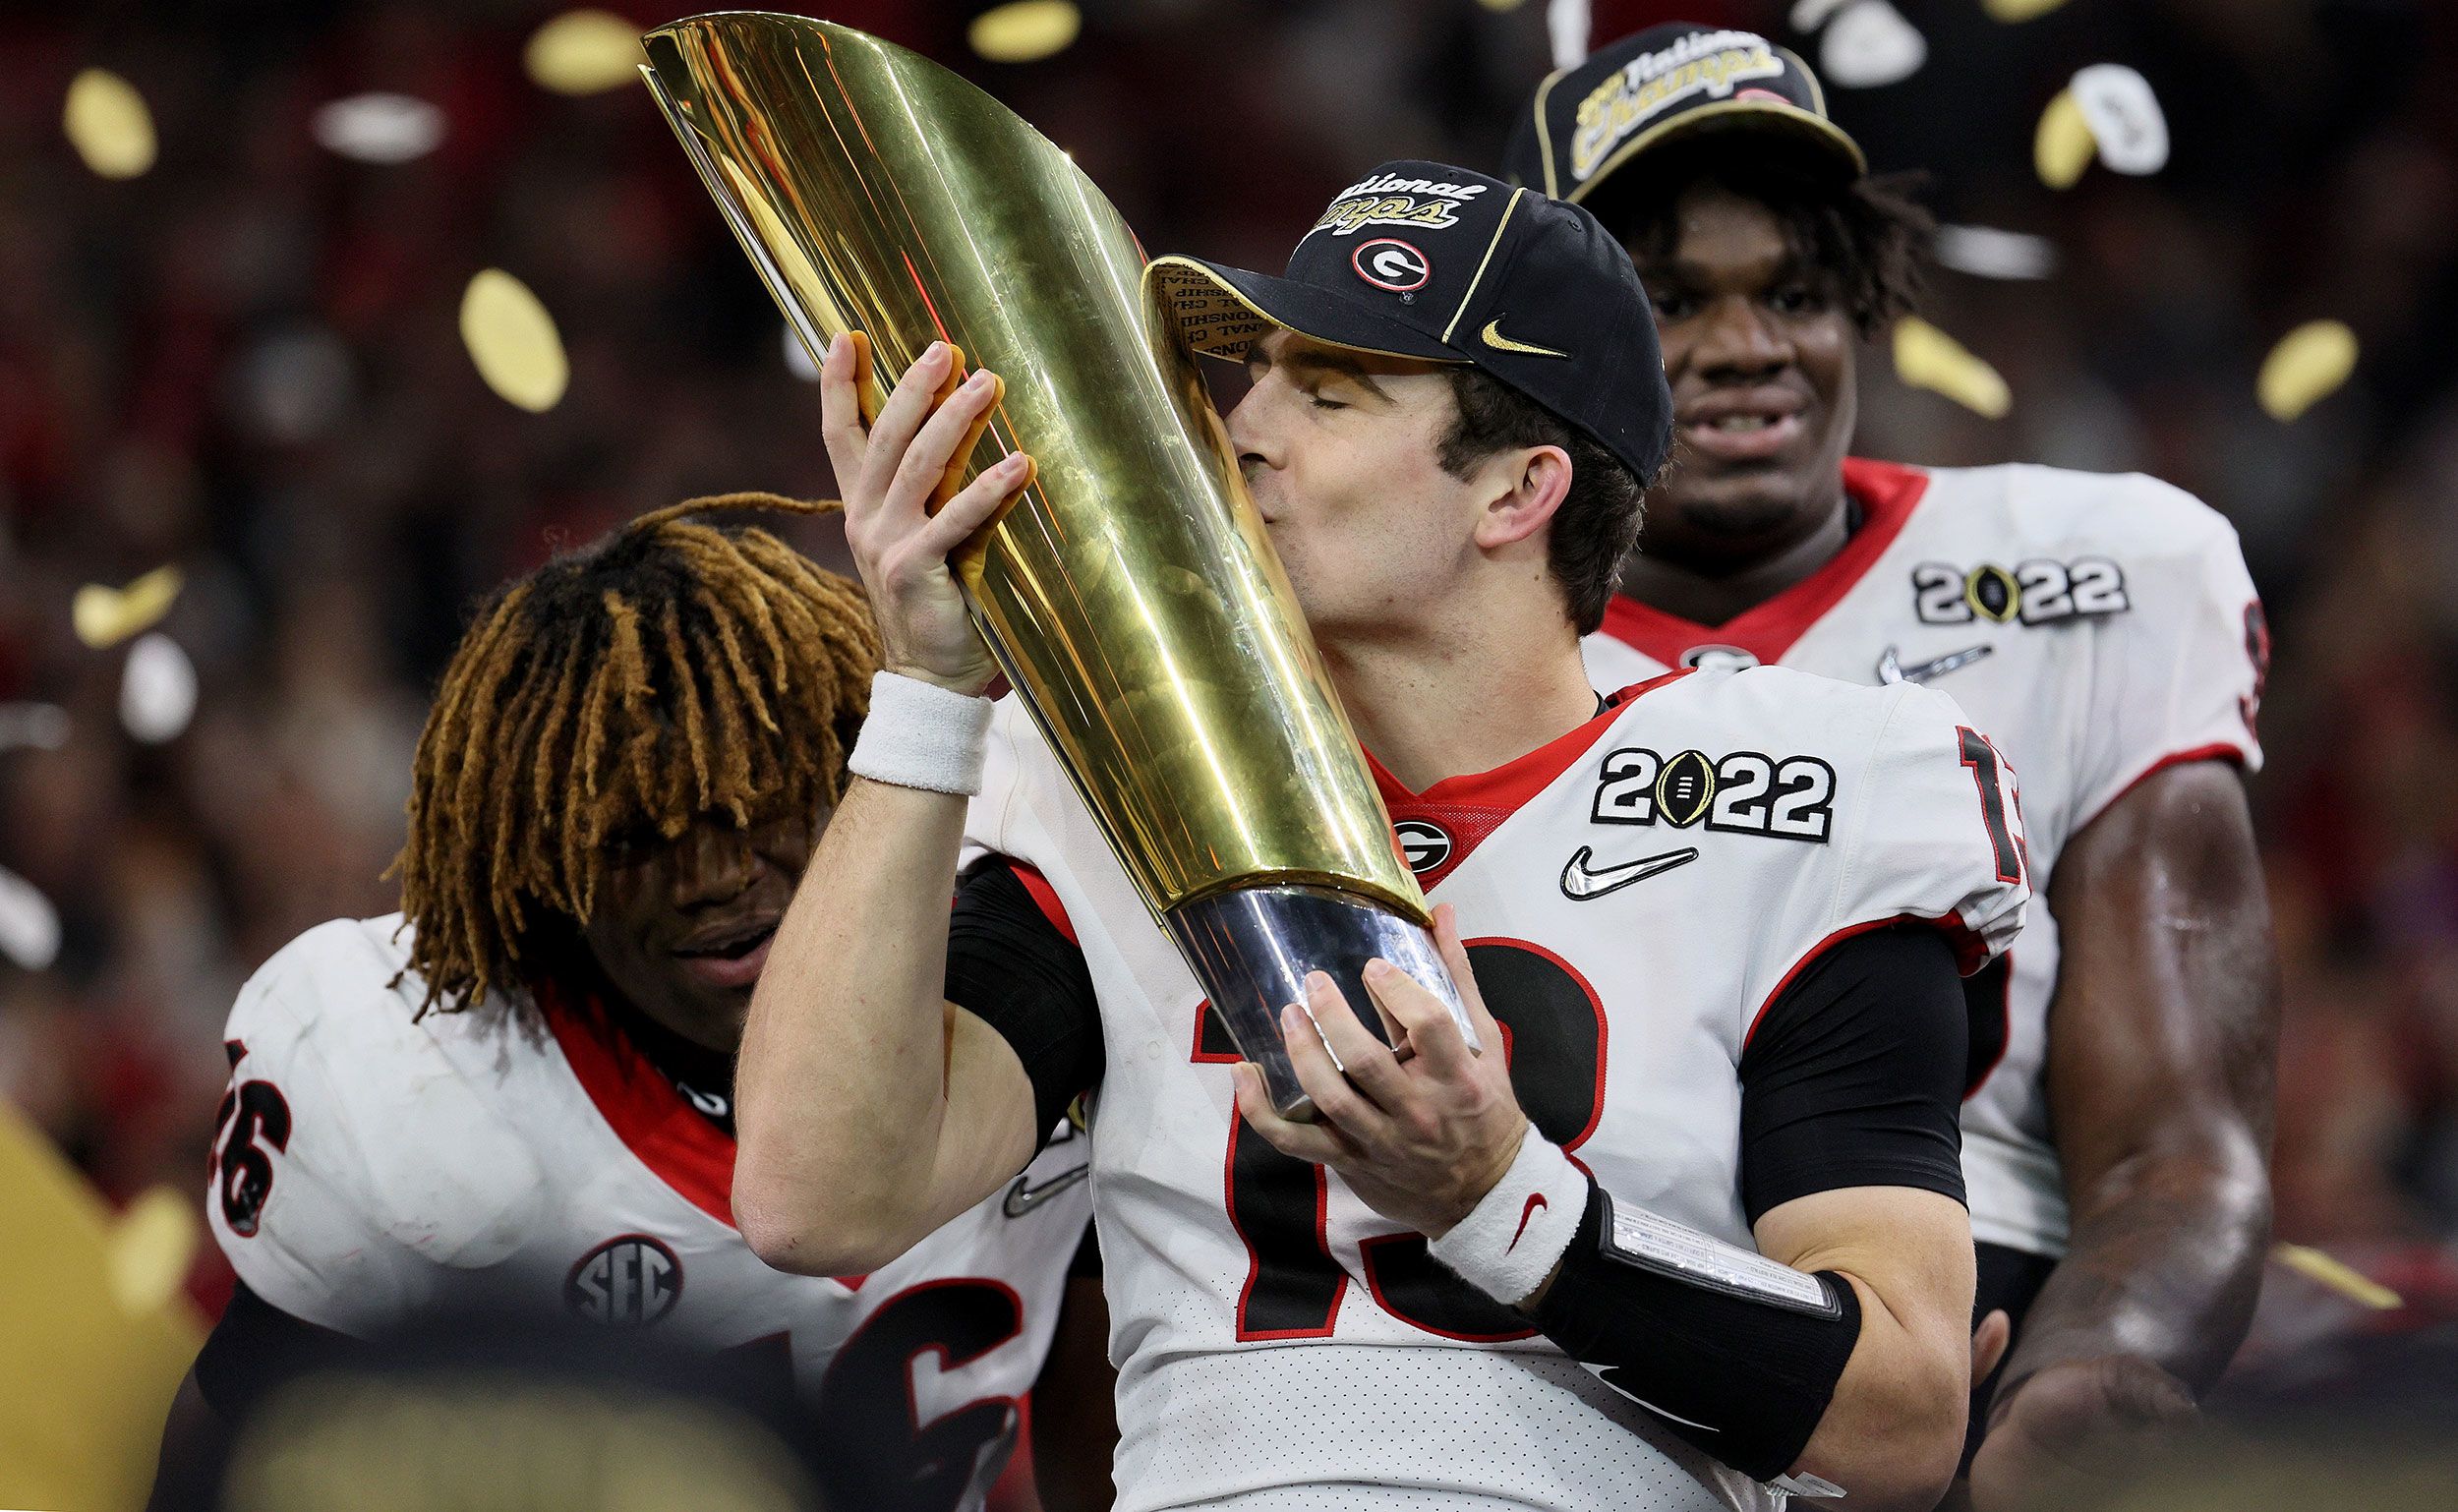 Georgia wins its first national championship in college football since 1980